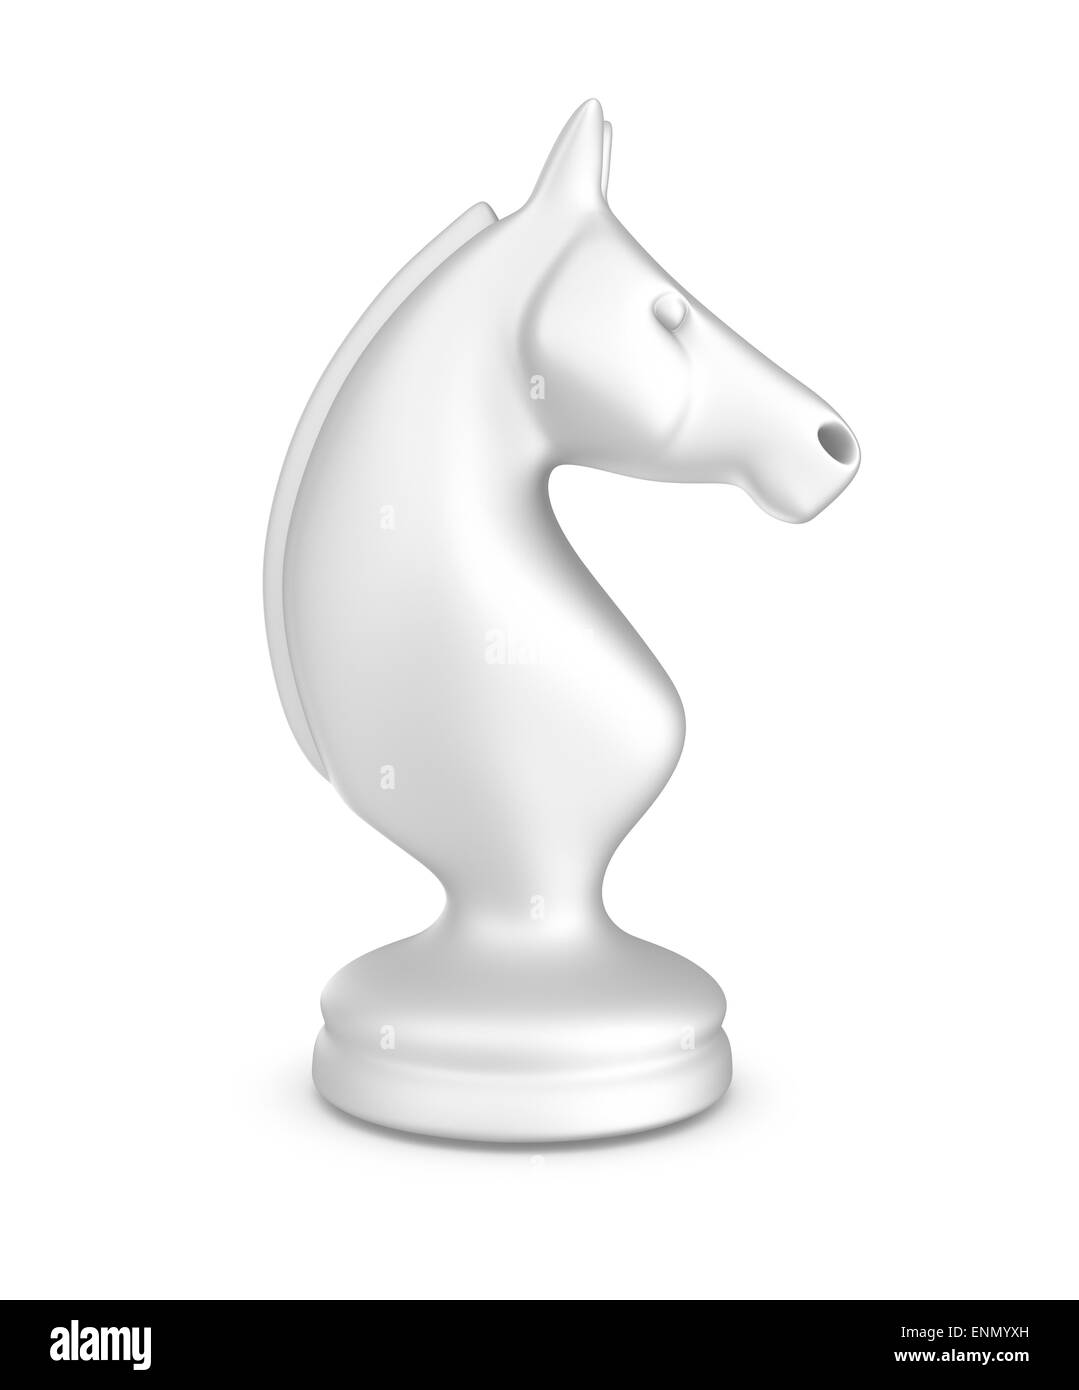 White Knight chess piece. Banque D'Images